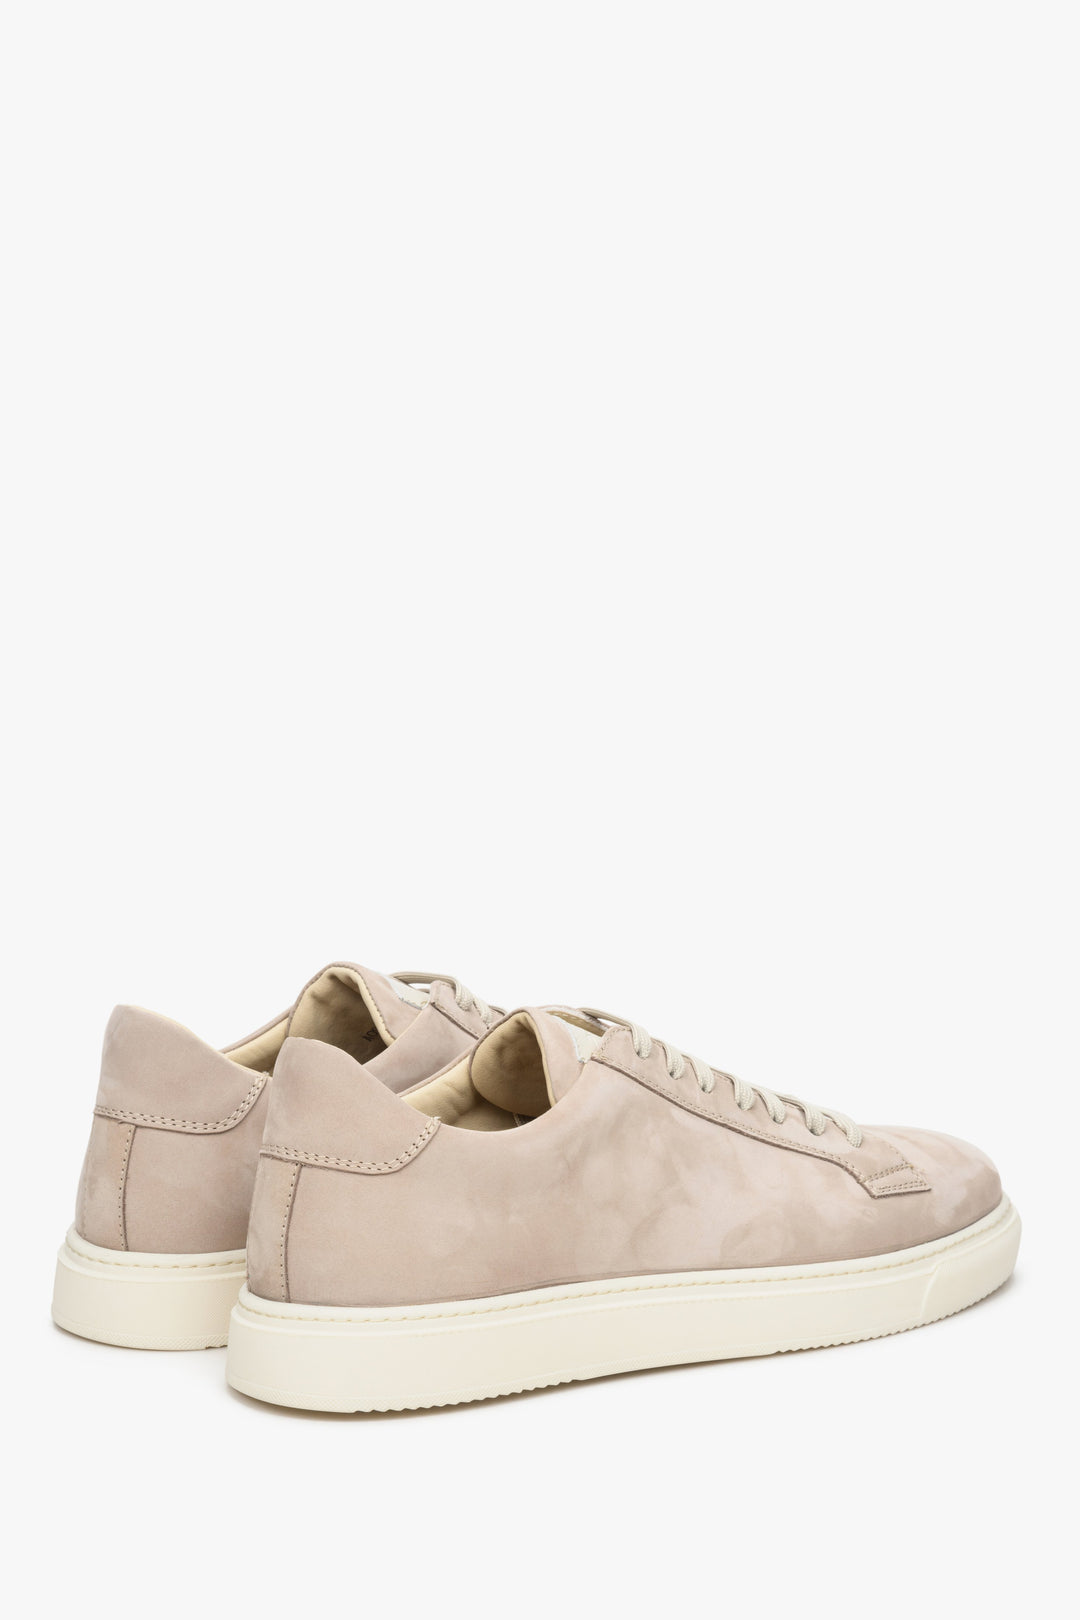 Beige nubuck men's sneakers for spring Estro - presentation of the sole and side seam.